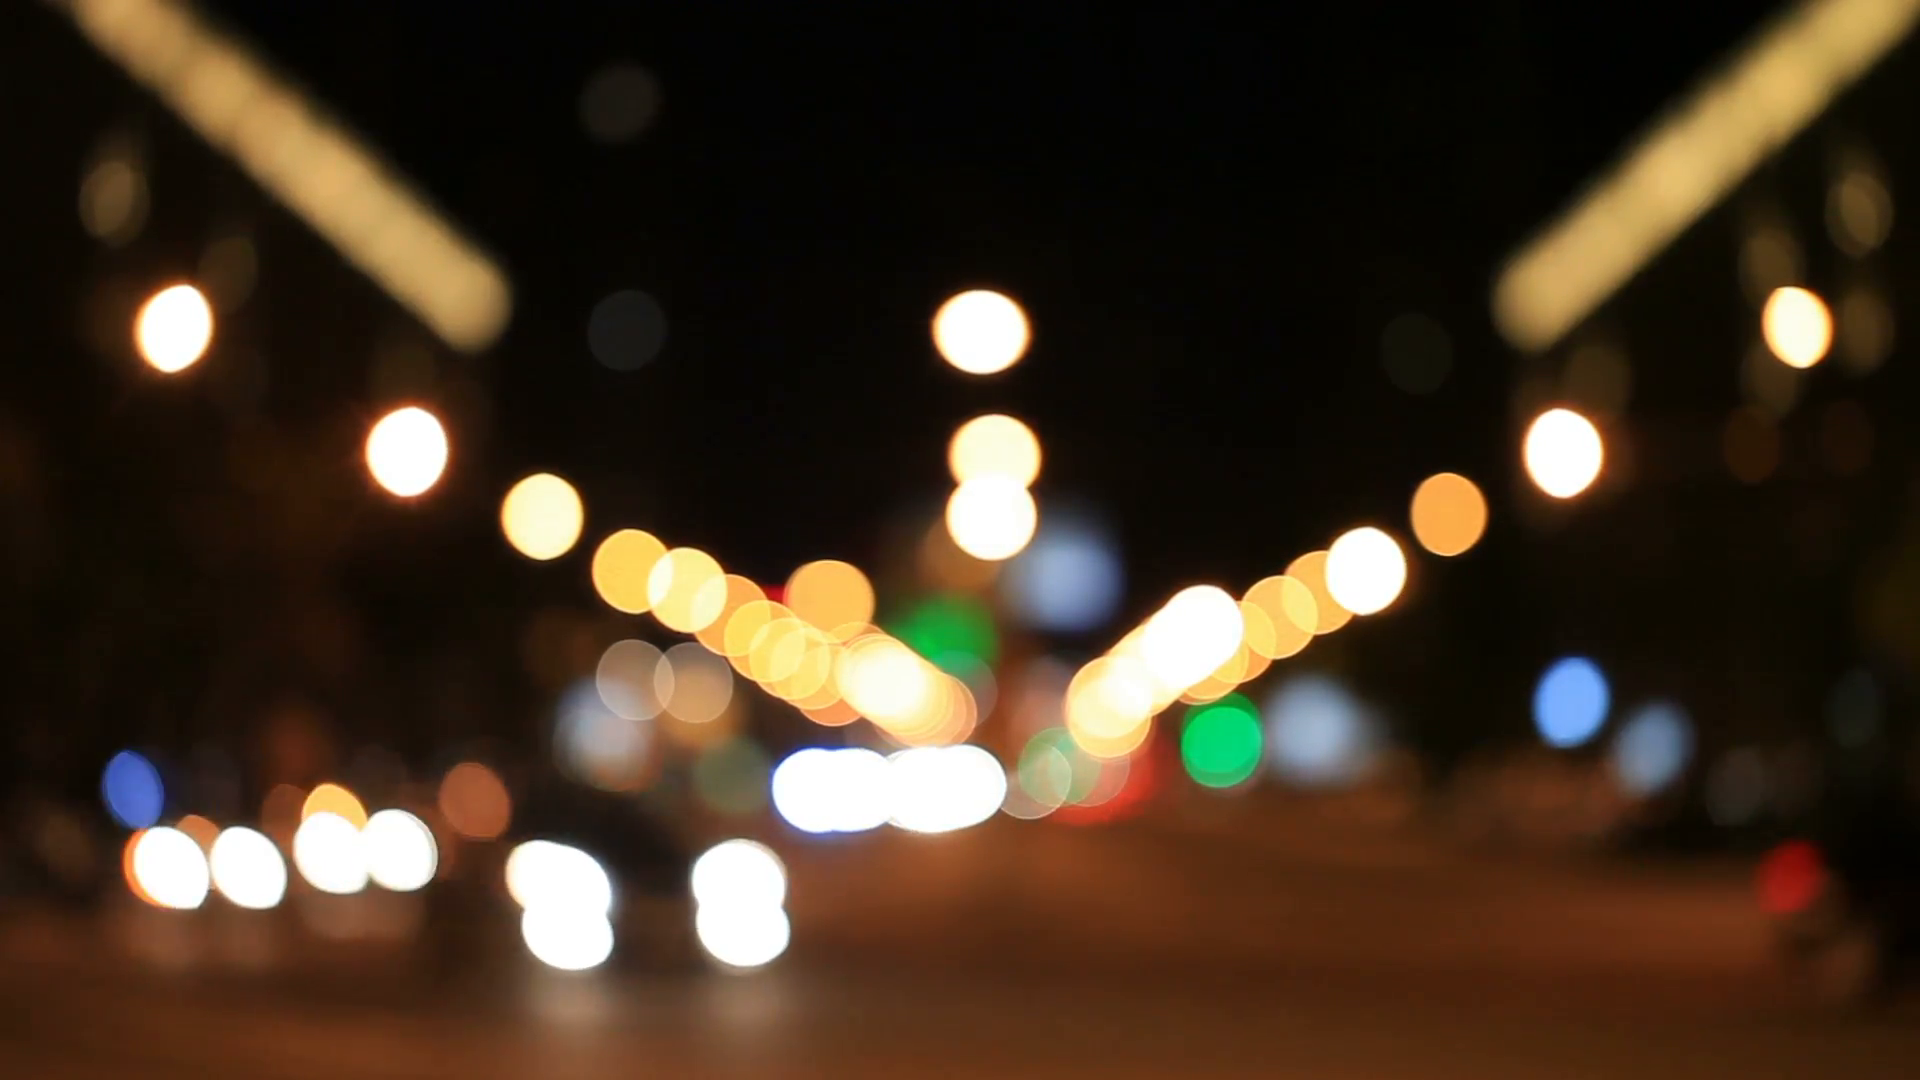 Evening traffic. The city lights. Motion blur. Abstract background ...